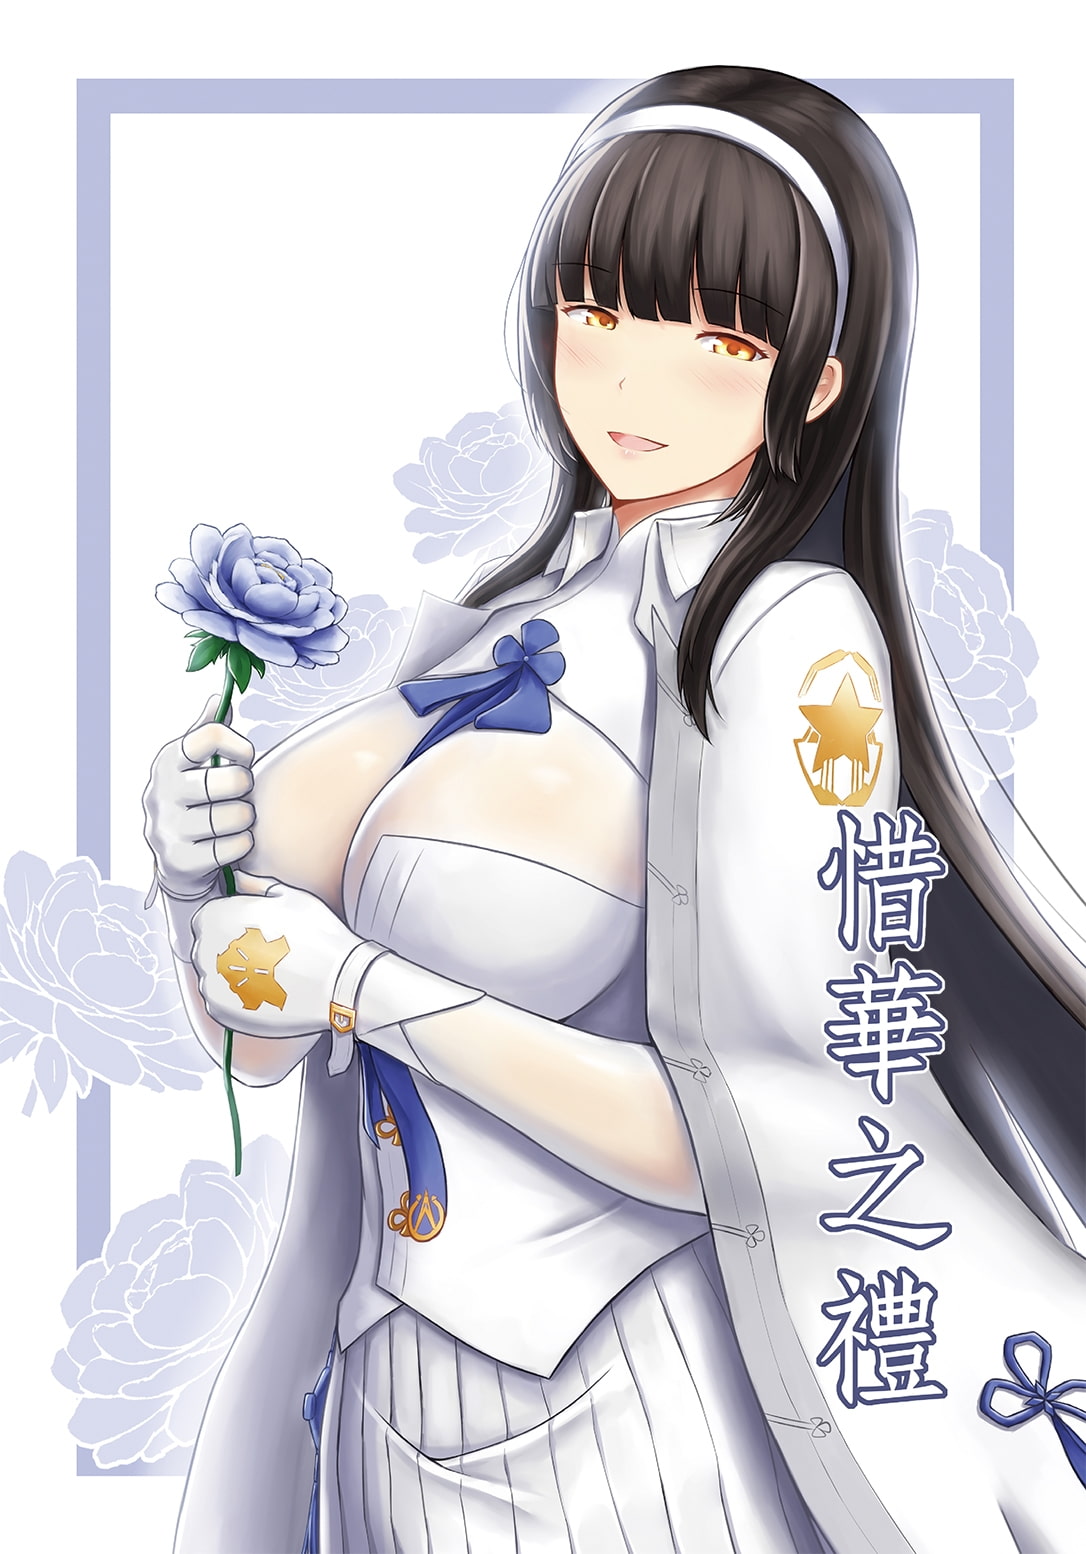 The Custom of Admiring Flowers - D*lls Frontline Type-95 [Chinese Edition]